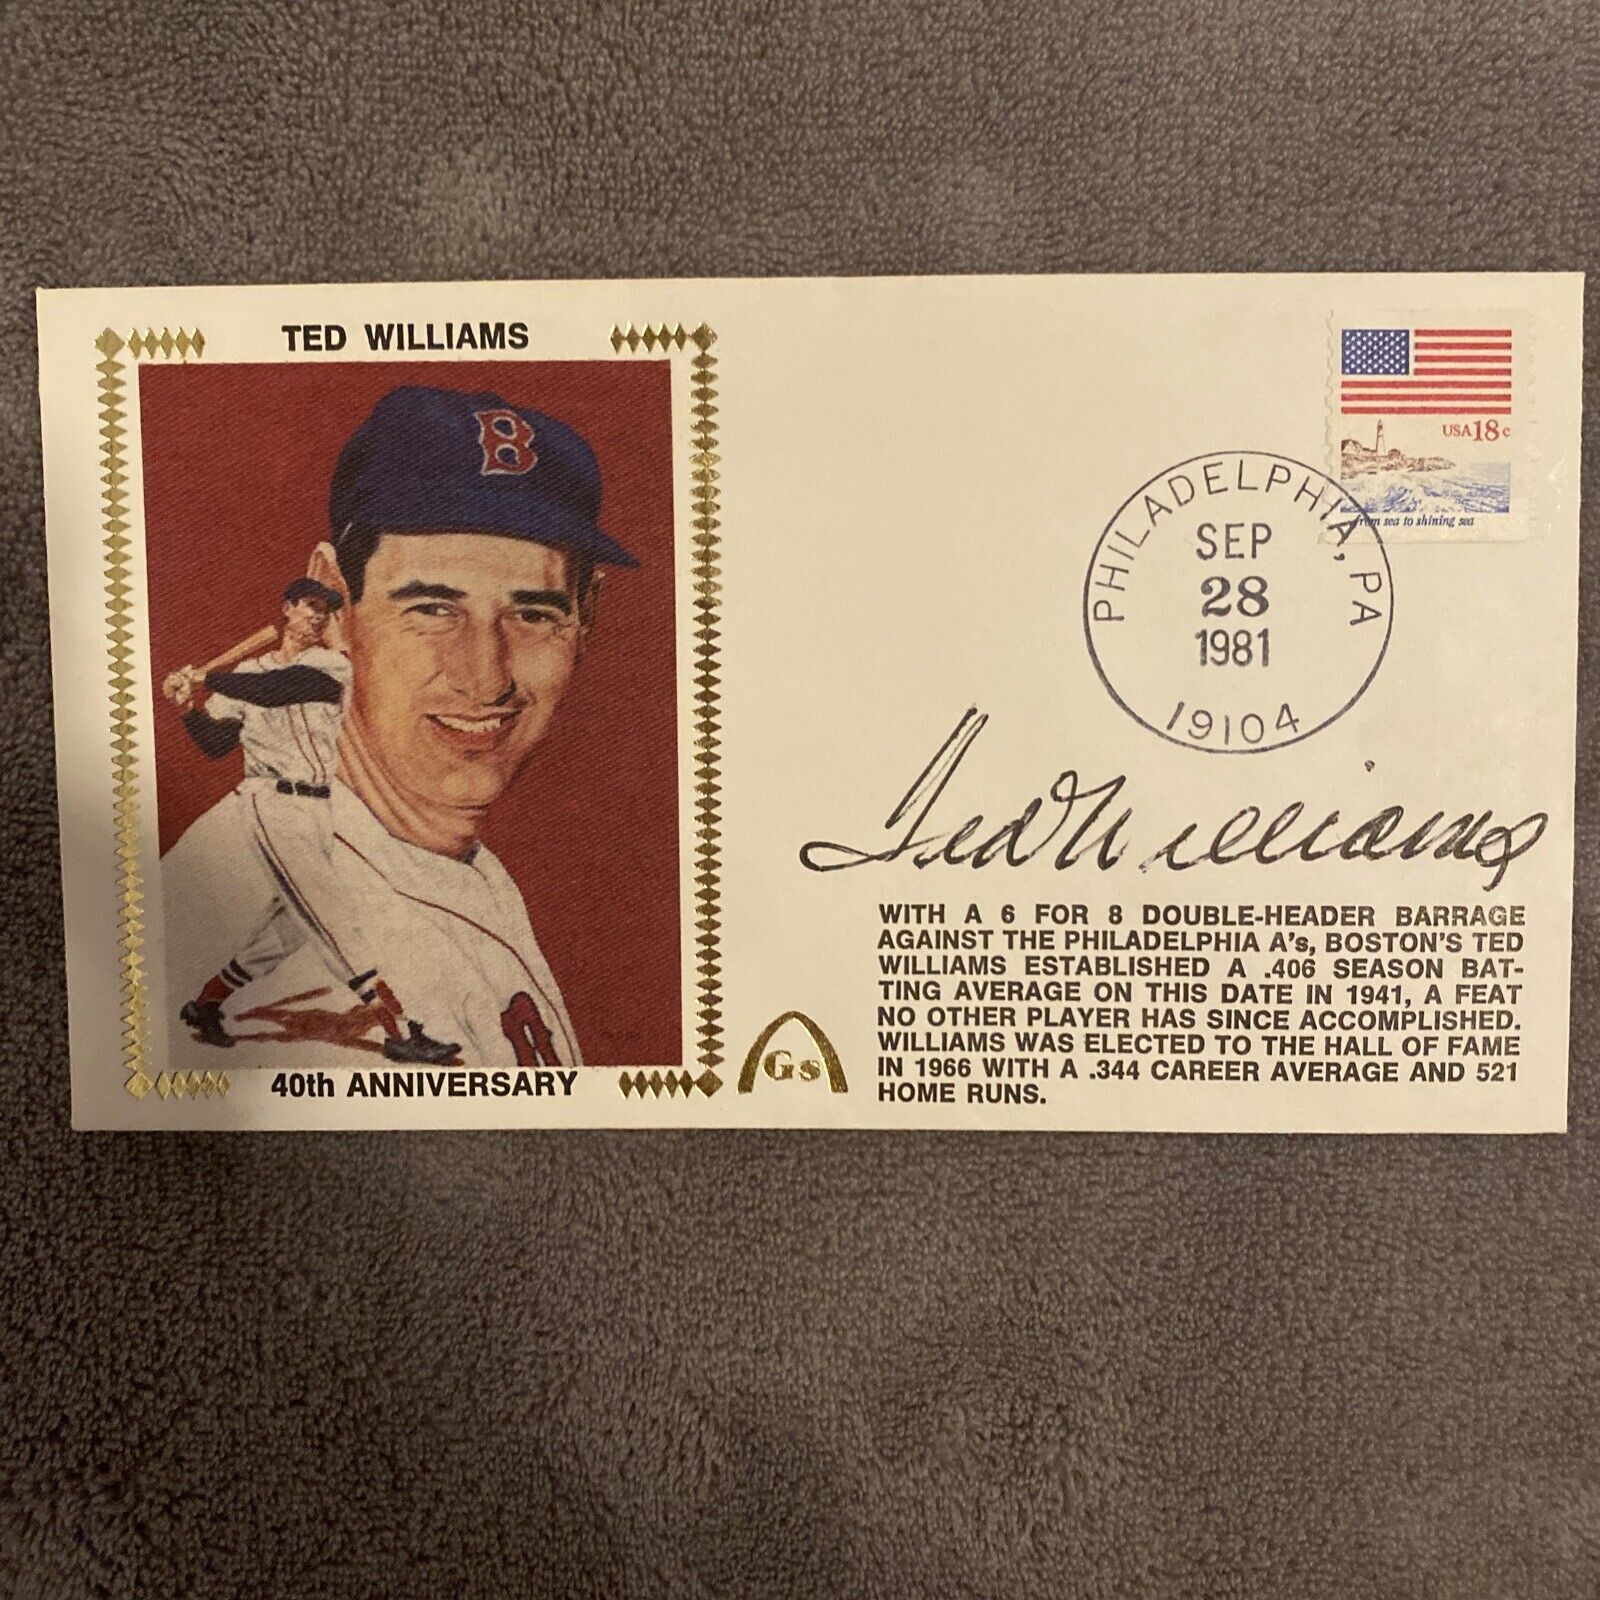 Ted Williams Autographed 40th Anniversary Gateway Stamp Cachet